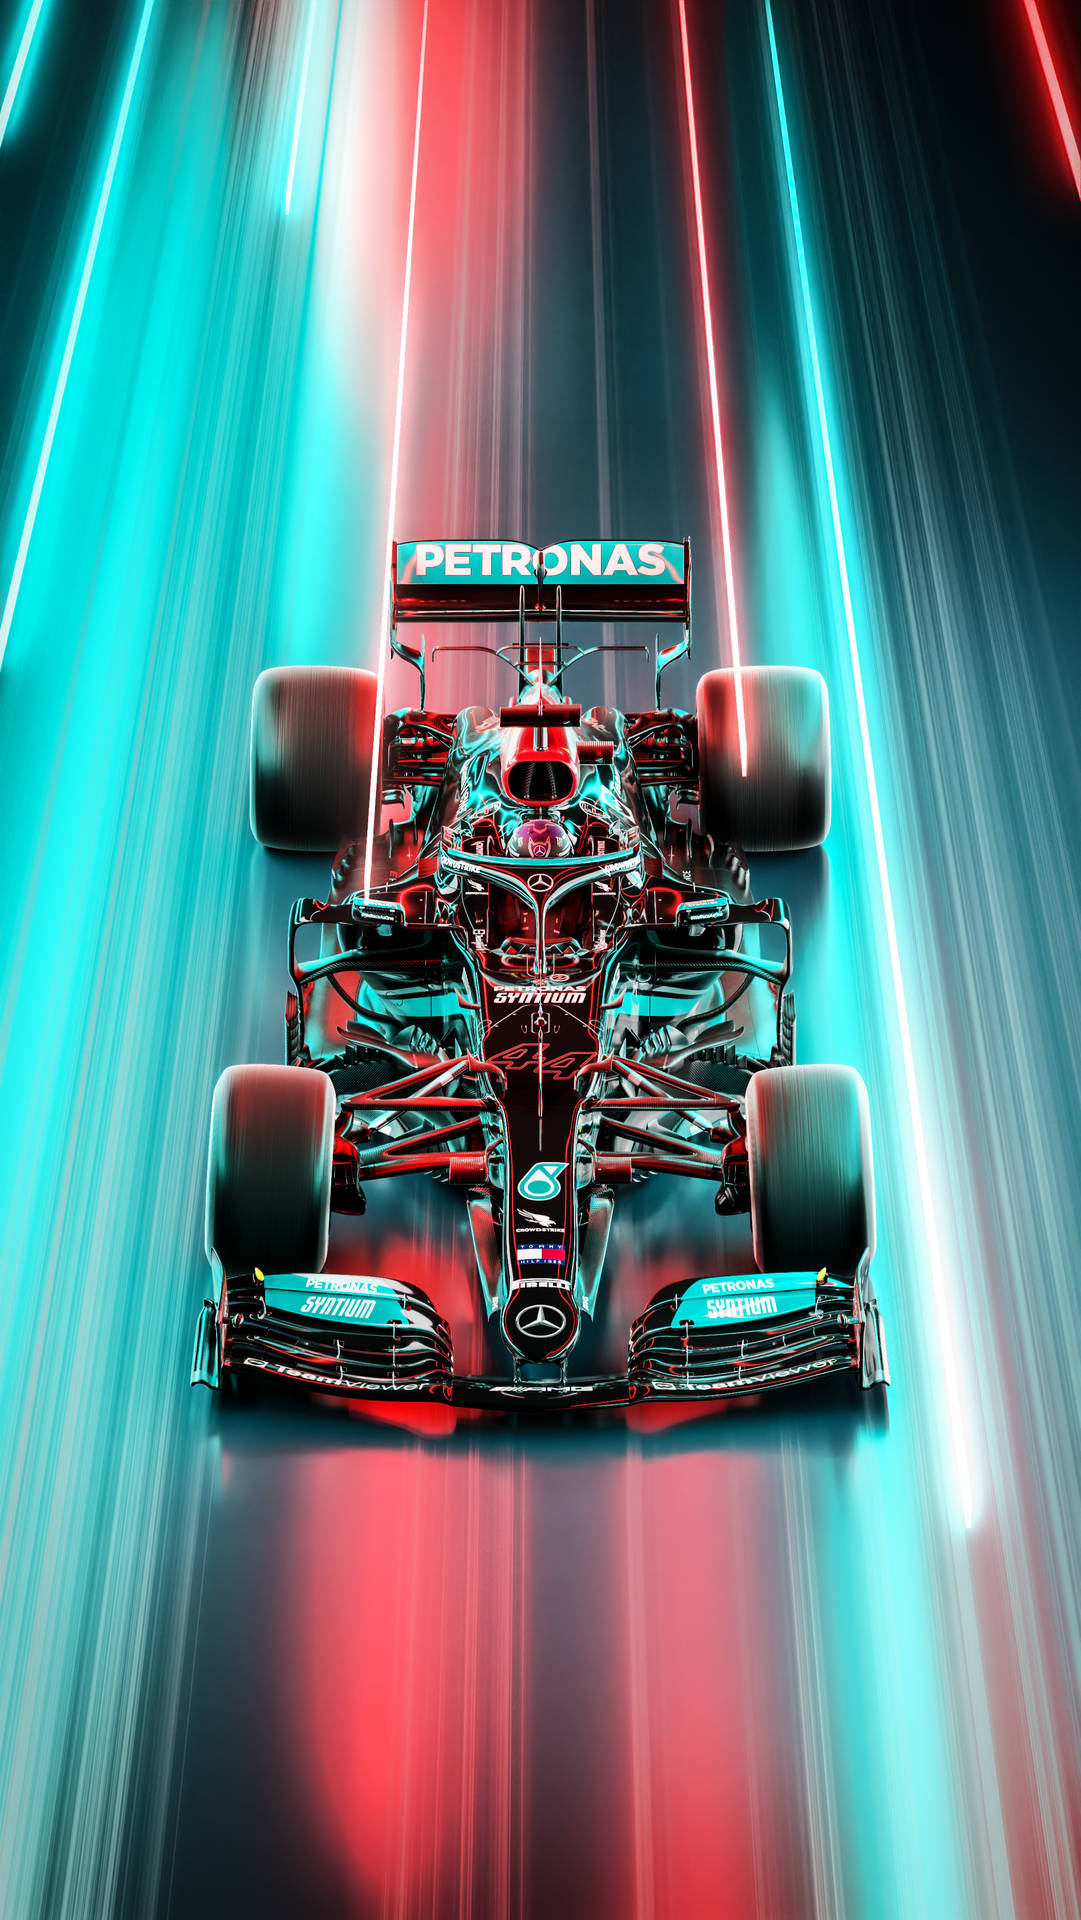 F1 Wallpaper  f1wallpaperzs  Instagram photos and videos